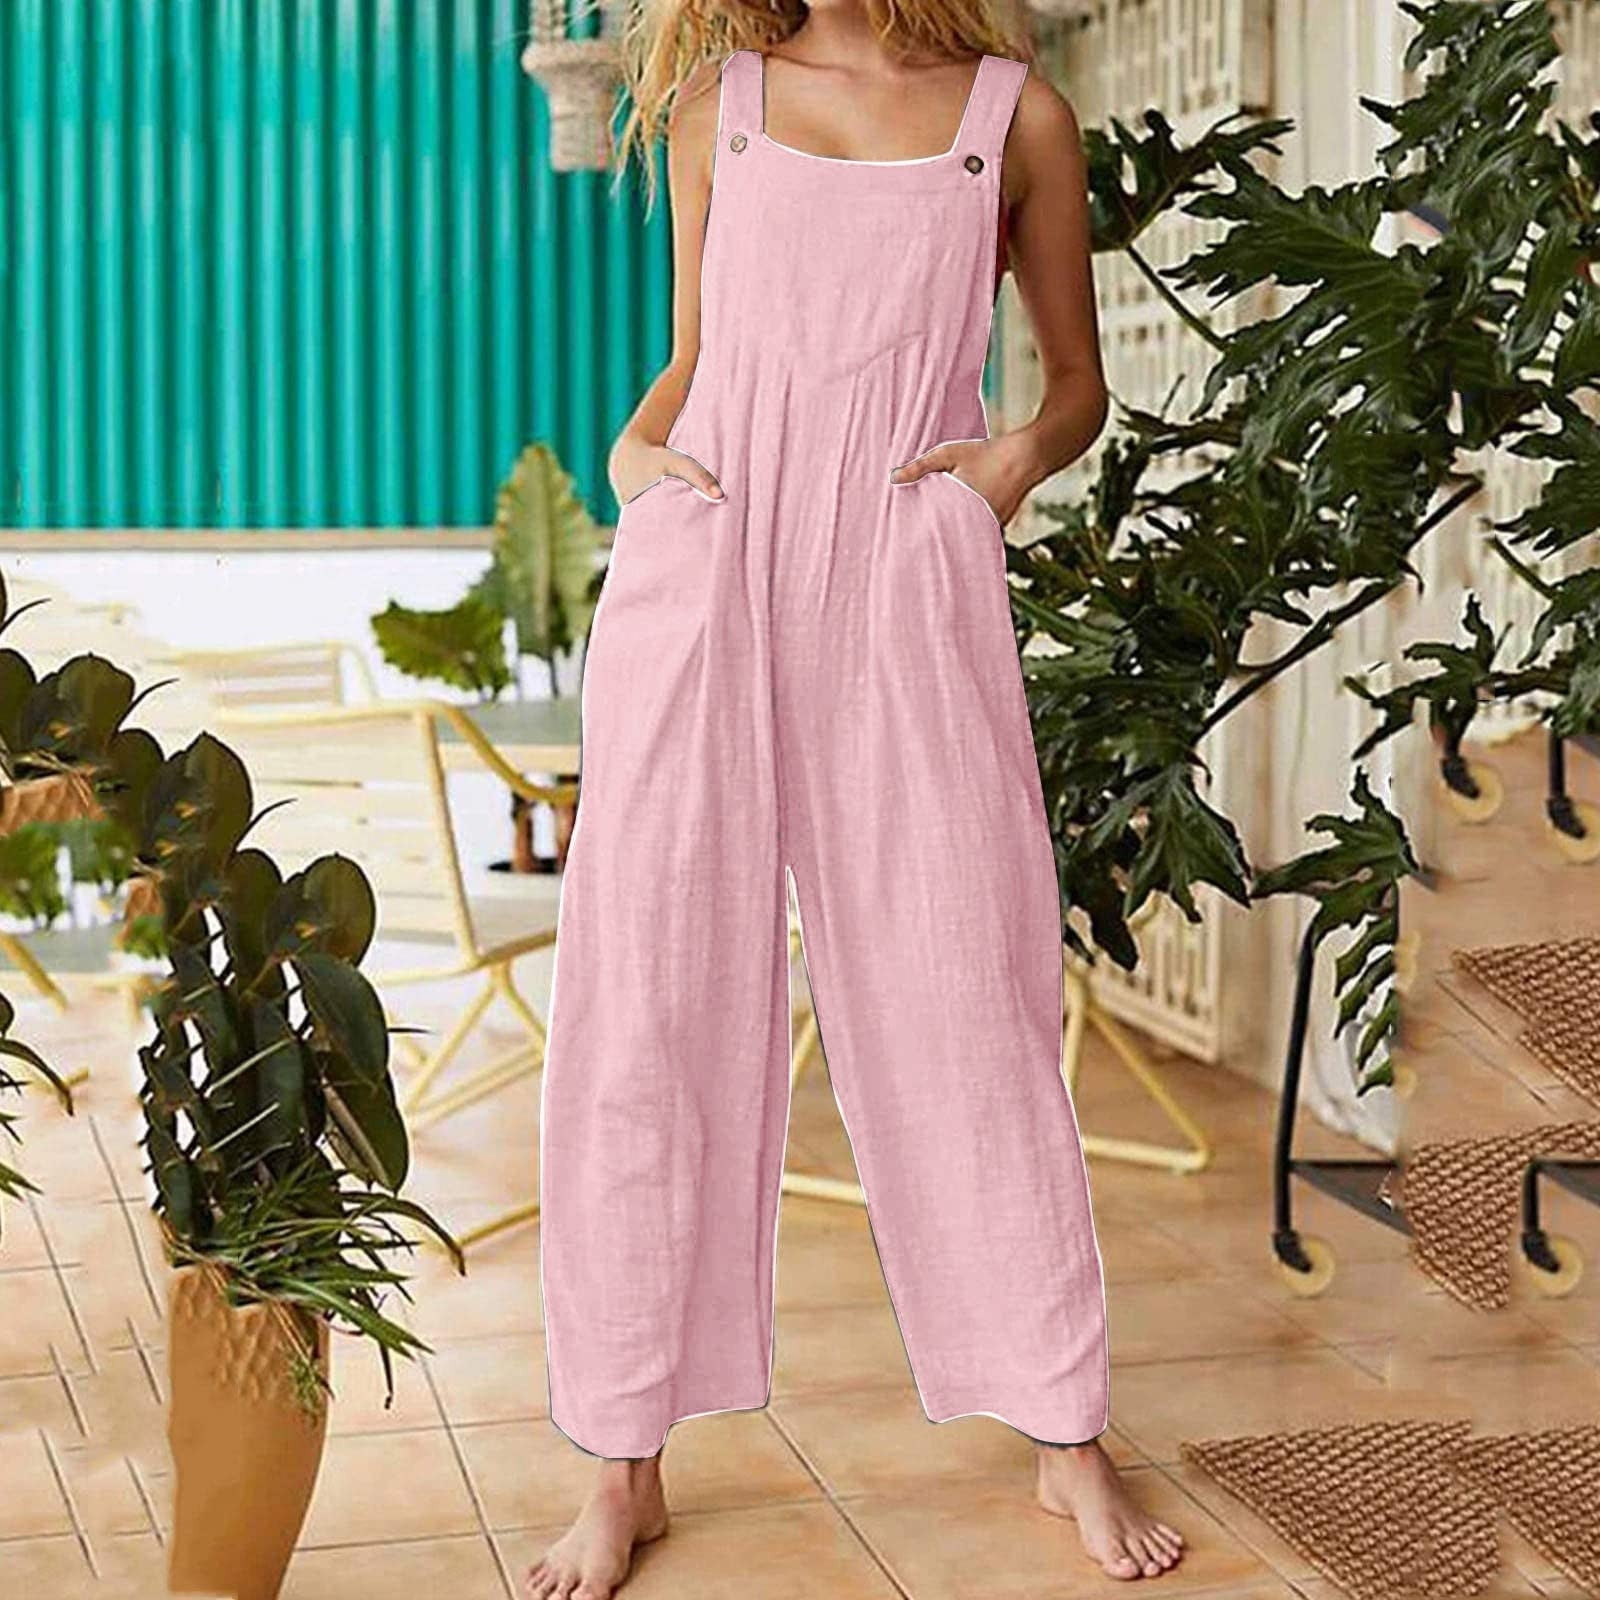 Up to 60% Off! pstuiky Jumpsuits for Women, Women Summer Casual